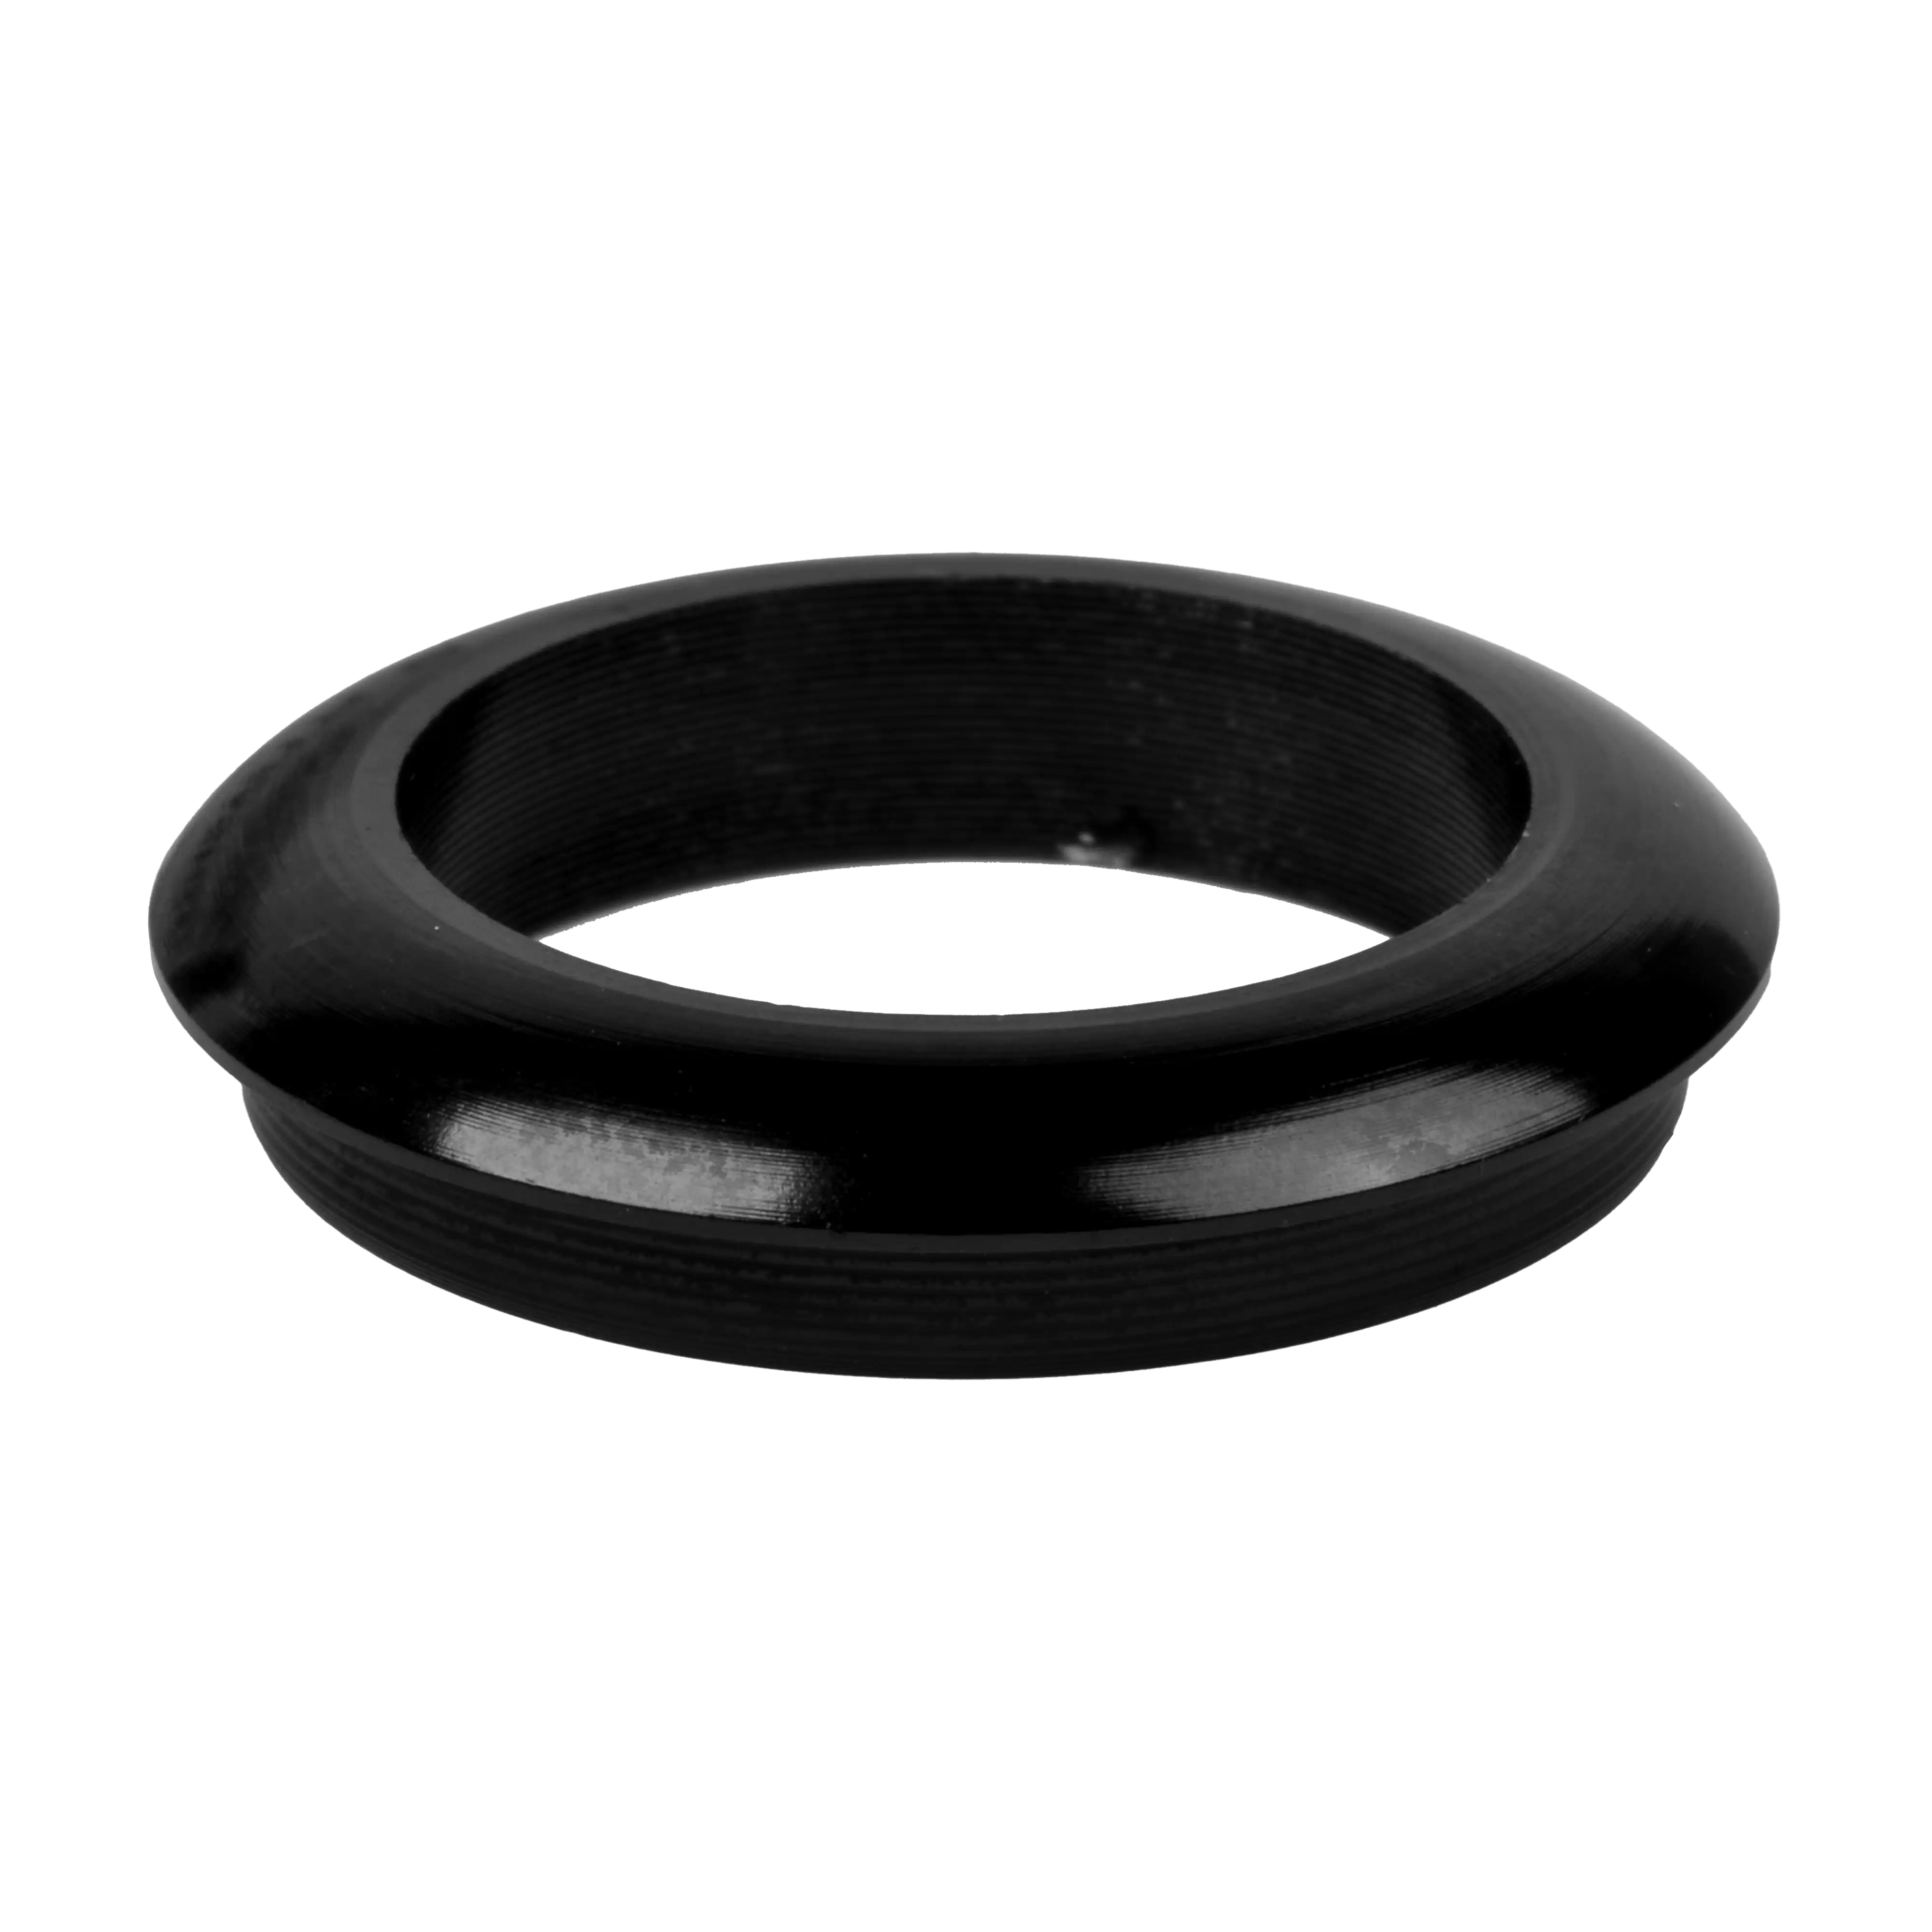 Trim Ring for G2 16" Saltwater Carbon Handle System